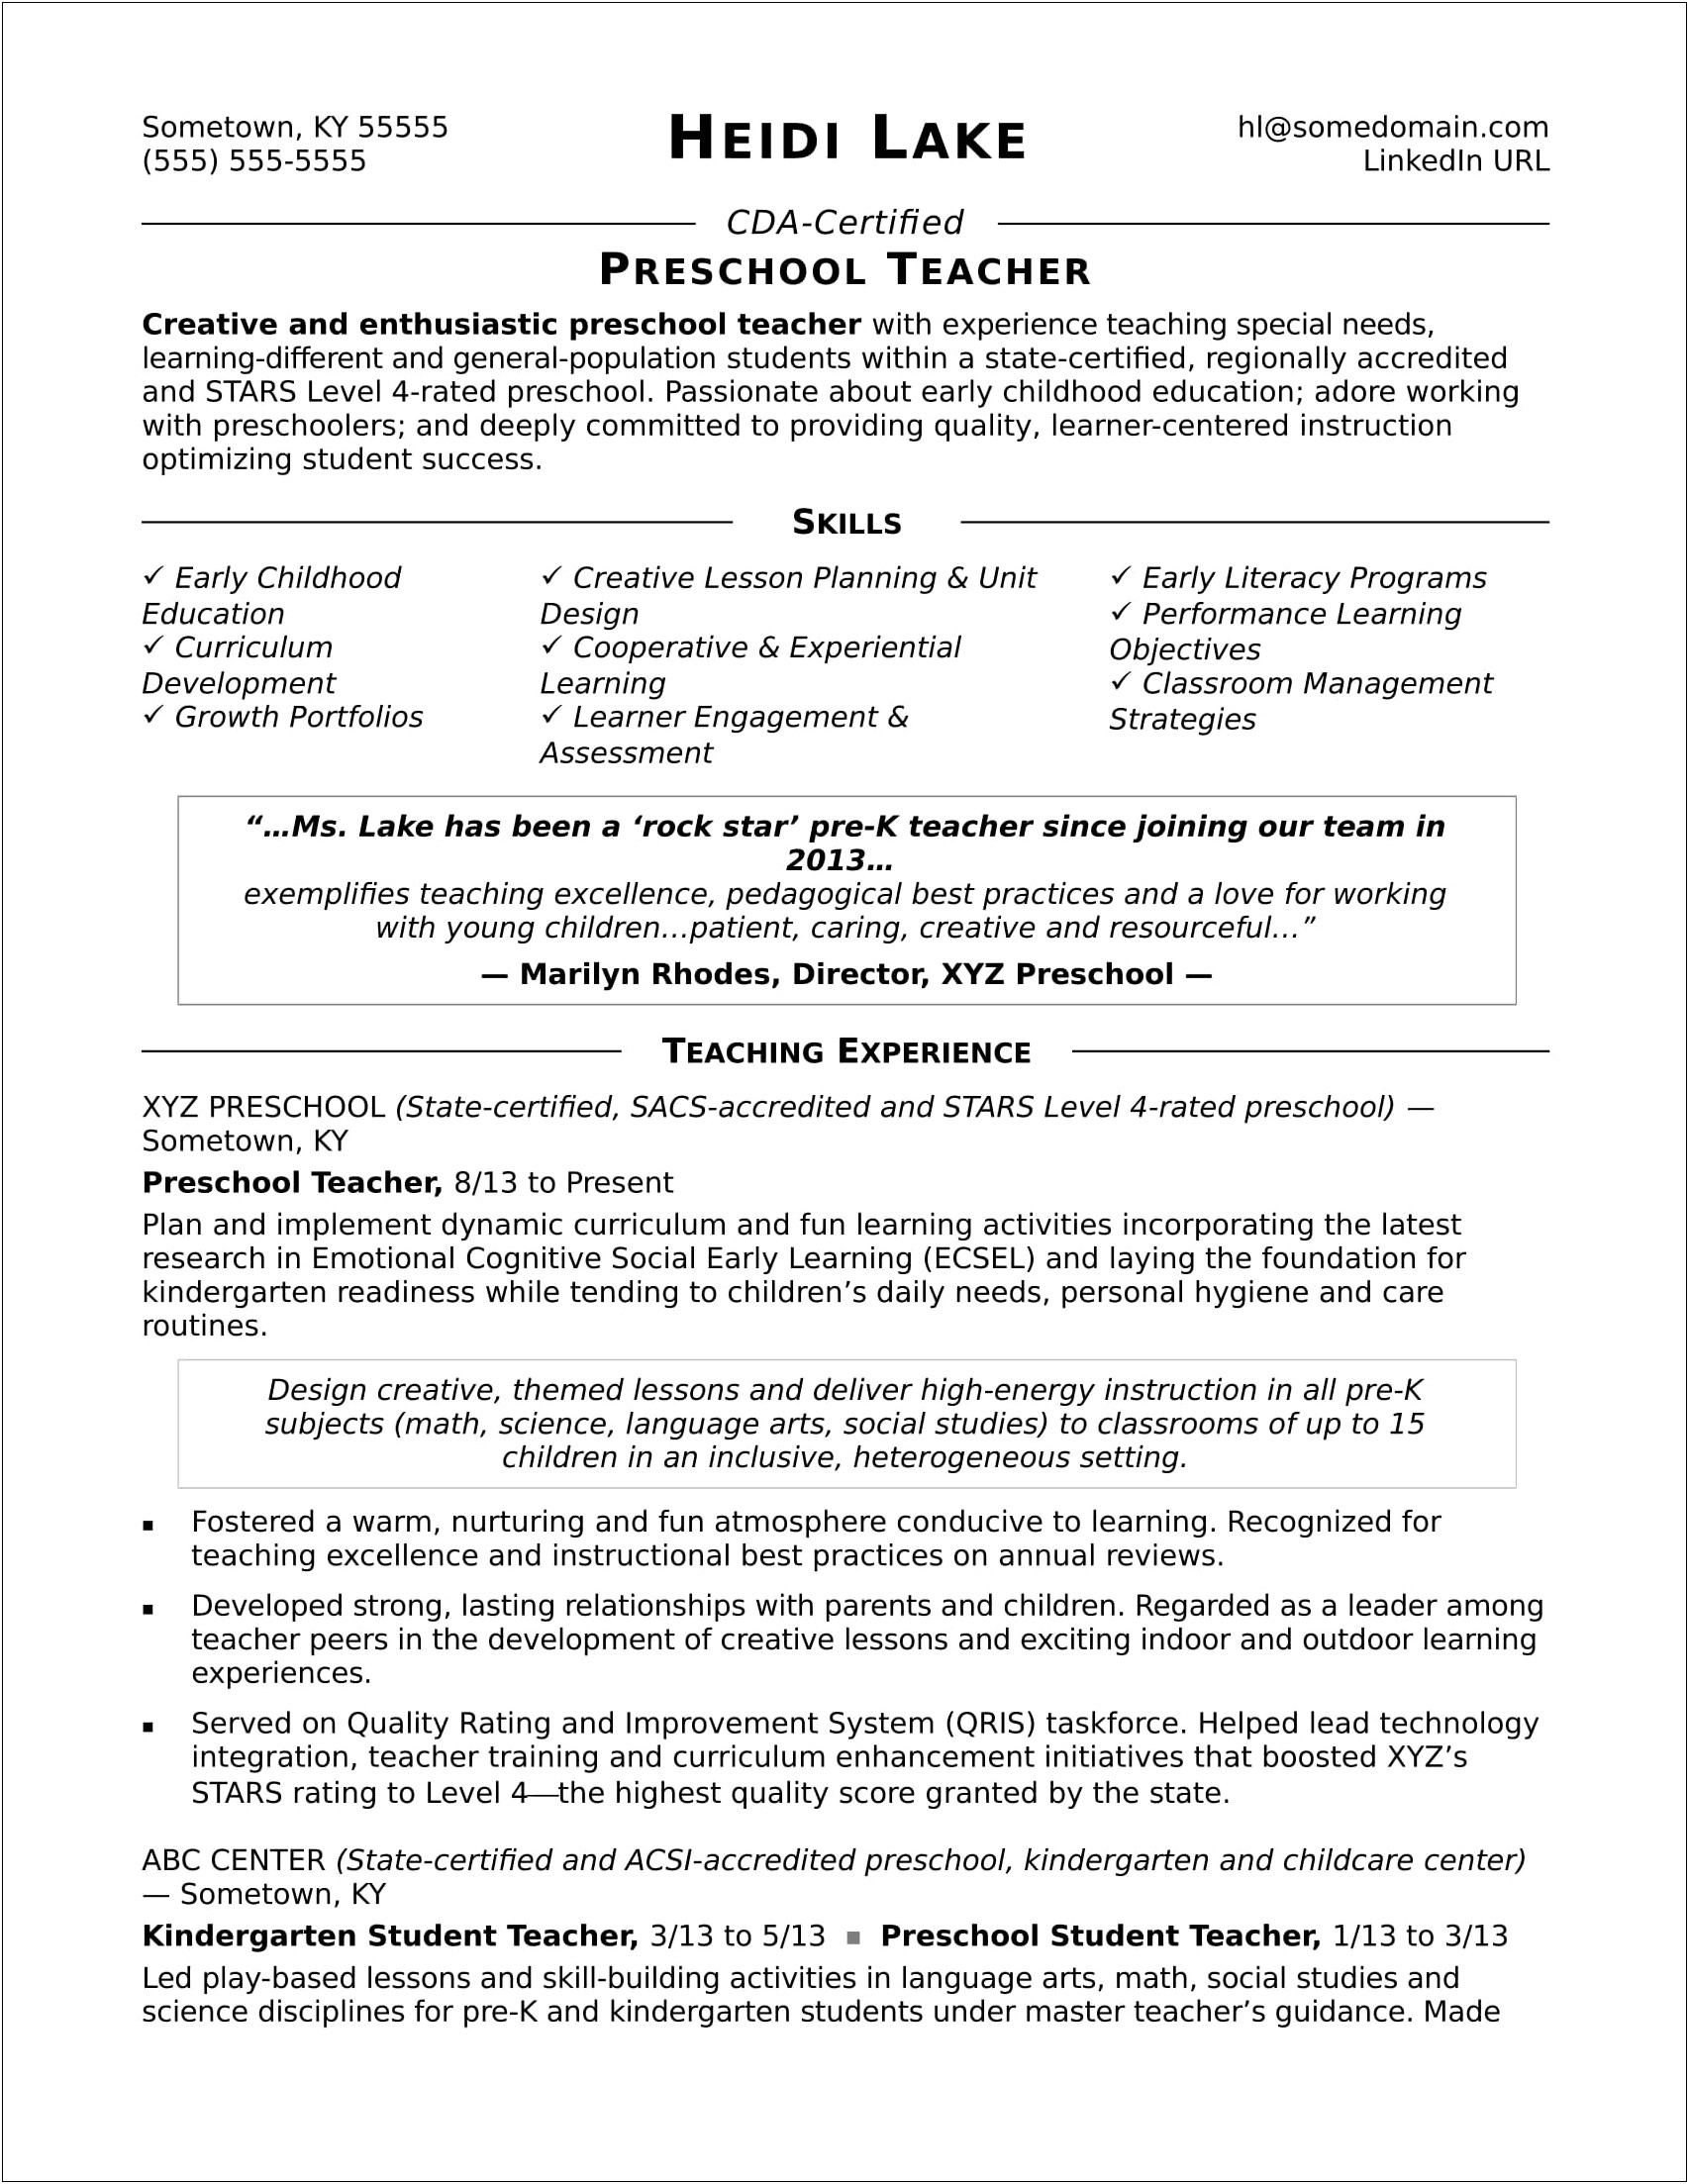 Resume Career Objective Examples Early Childhood Education